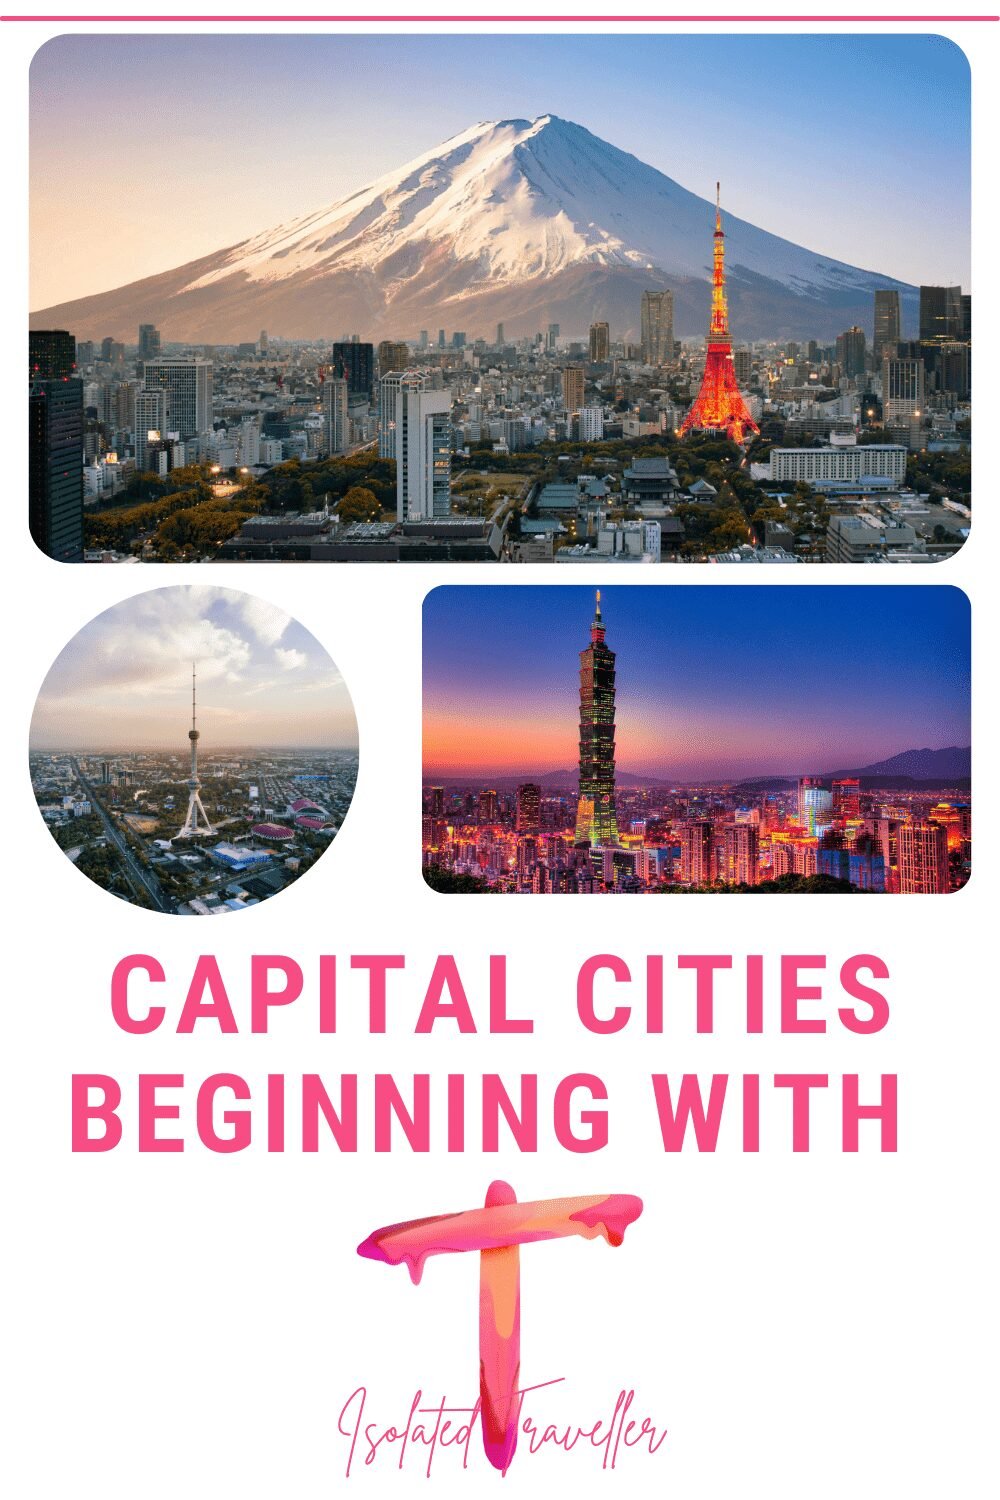 Capital Cities beginning with T